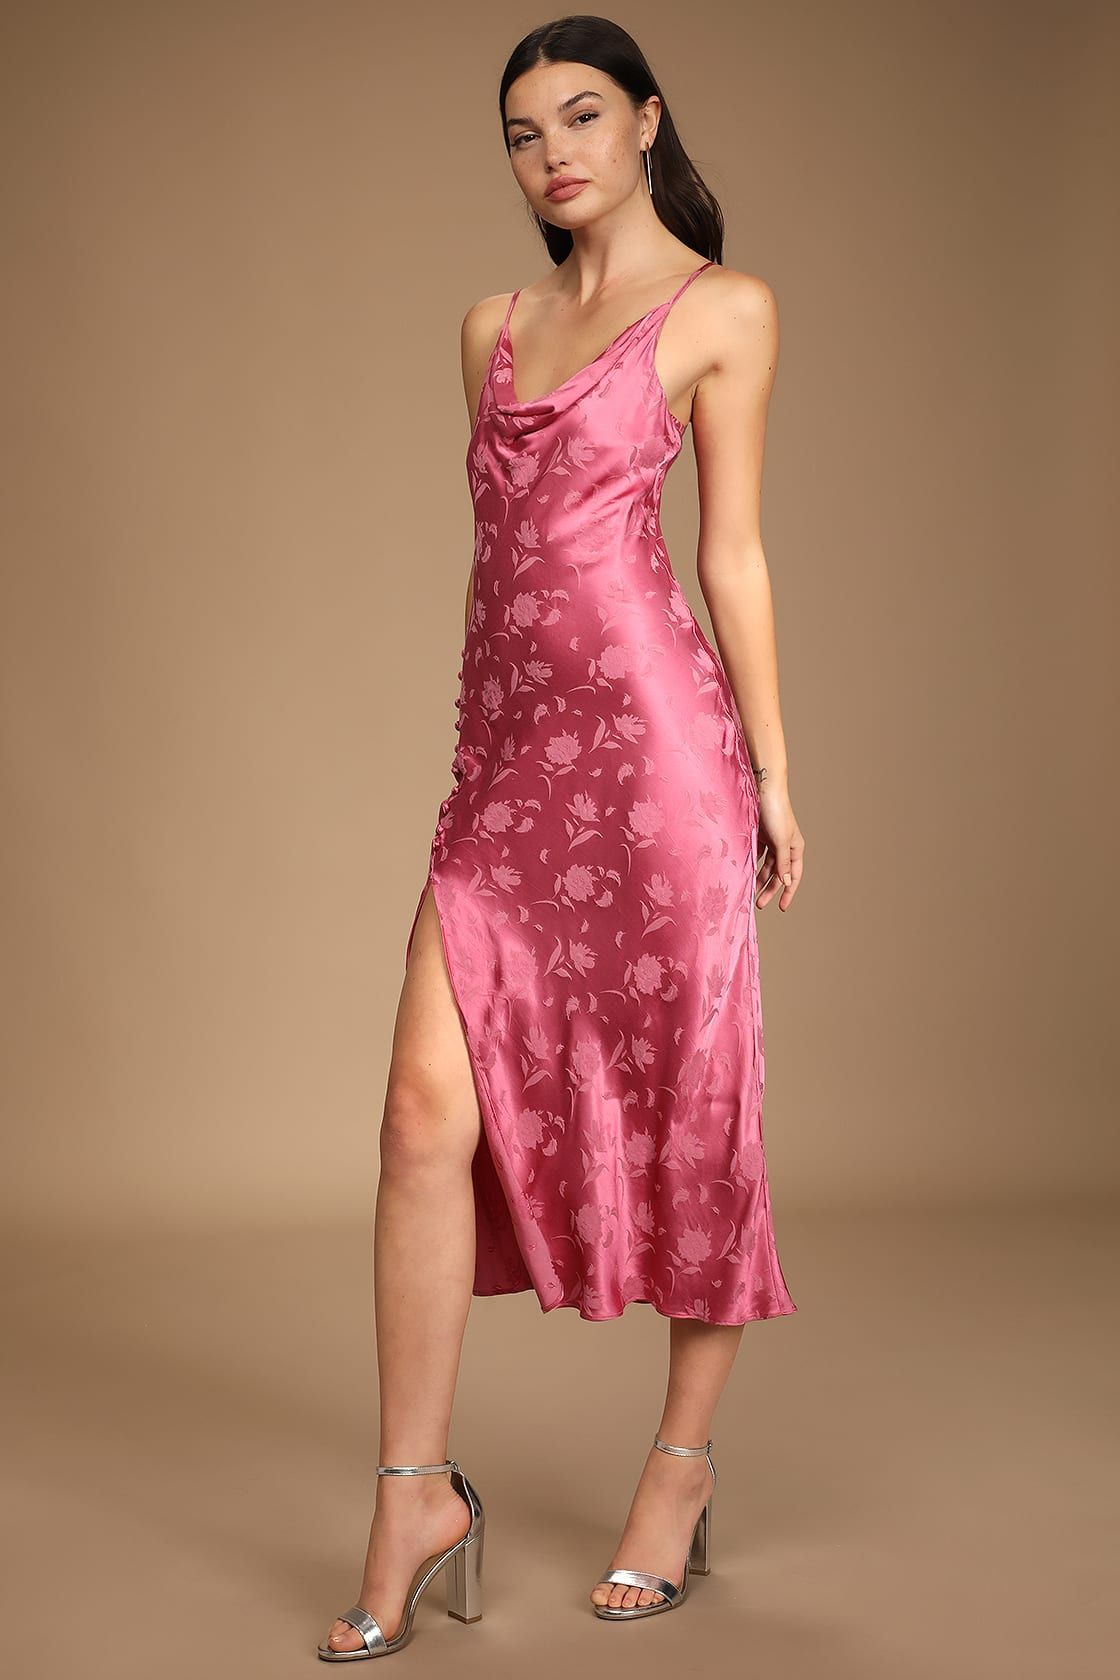 All About You Pink Floral Jacquard Satin Midi Dress | Lulus (US)